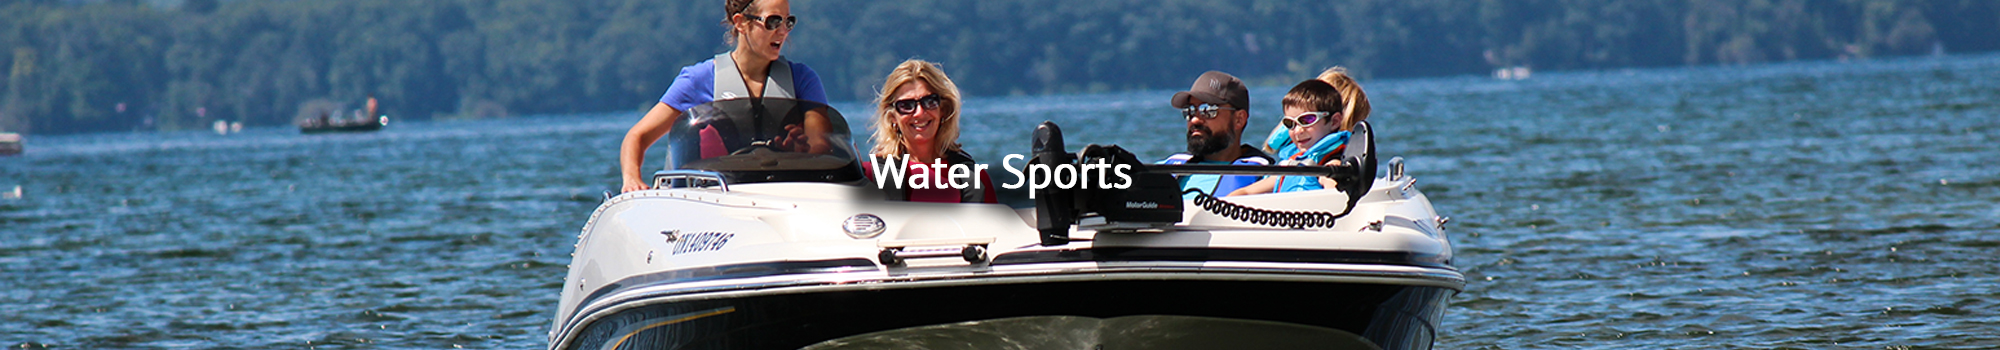 homepage-water-sports